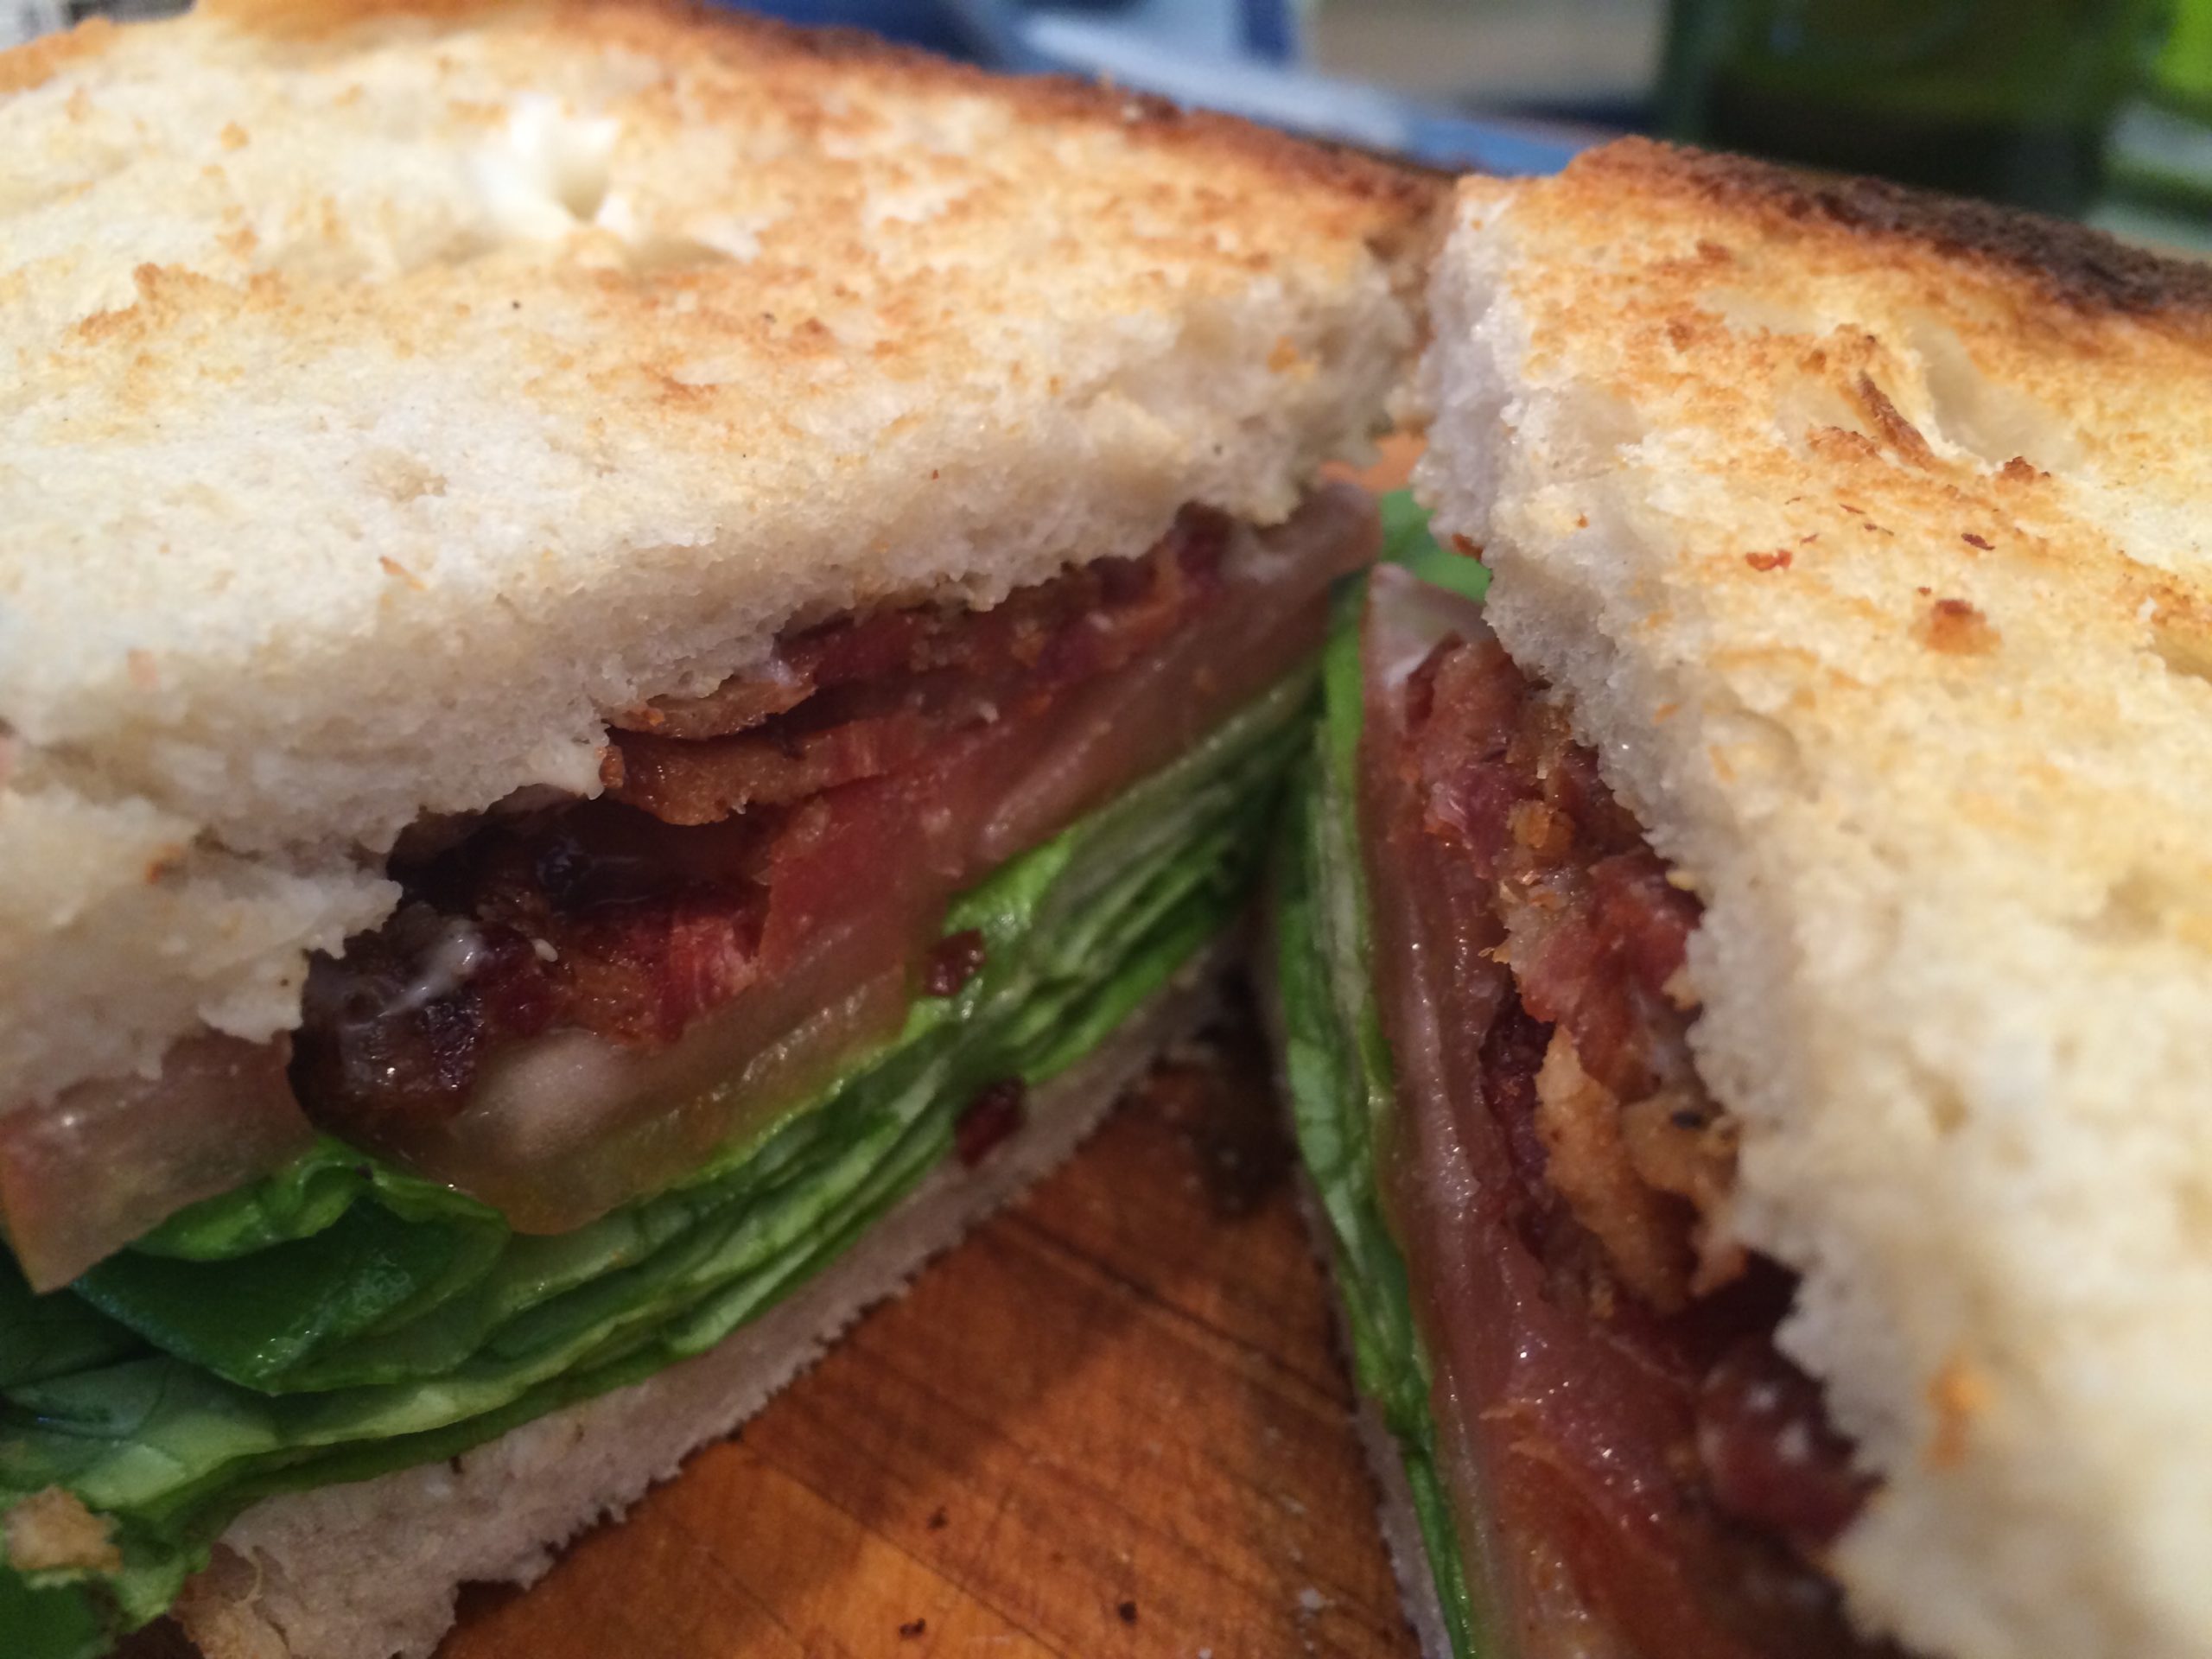 BLTs for lunch! Yum, if I do say so myself.